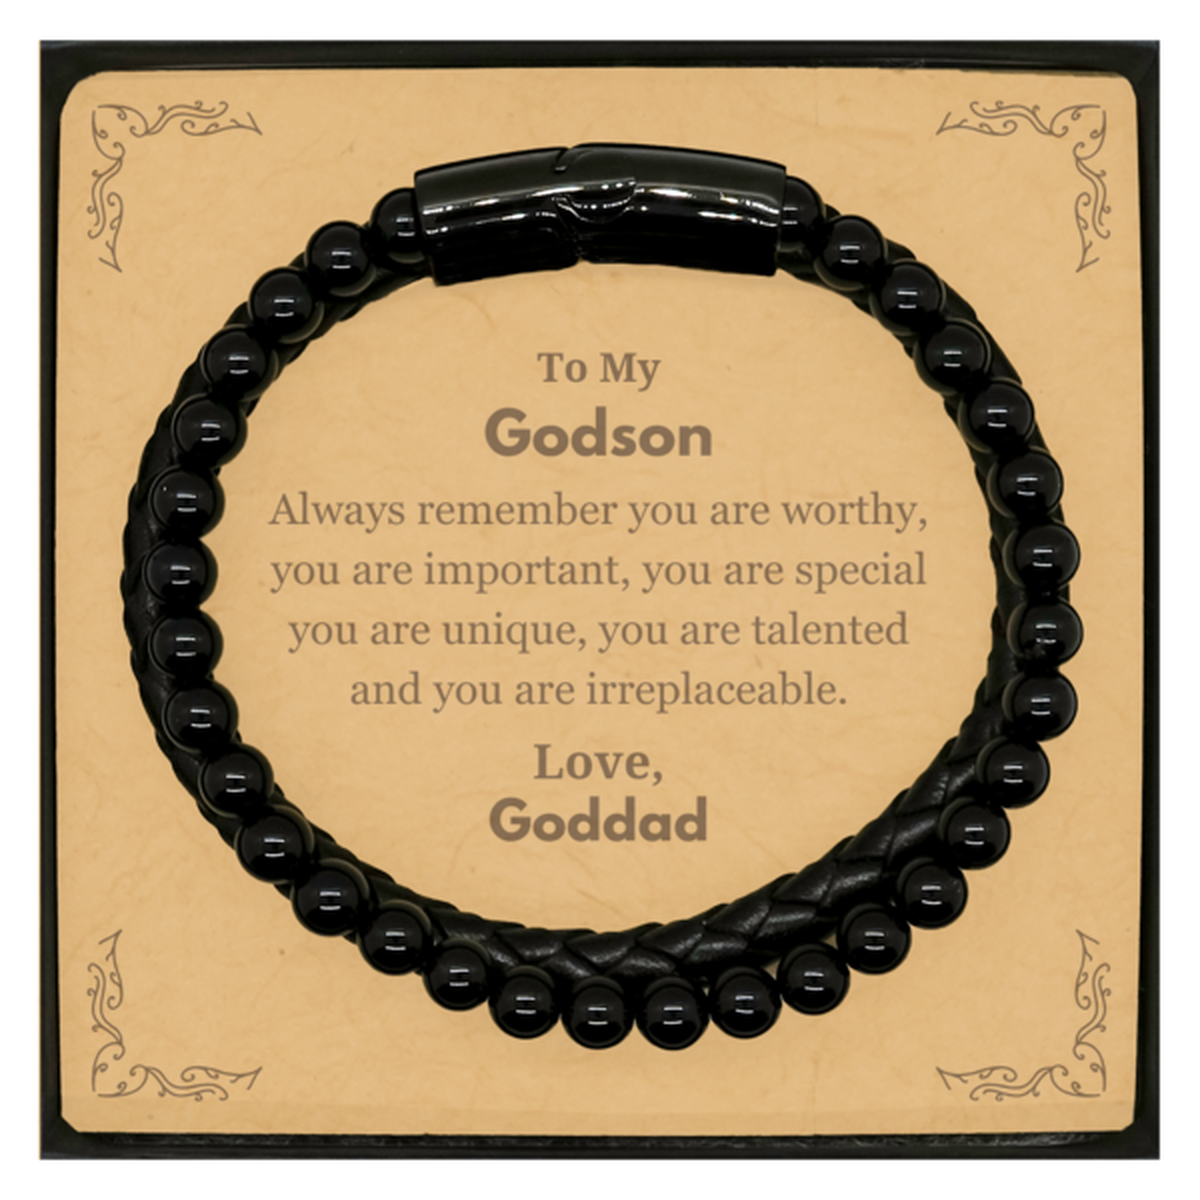 Godson Birthday Gifts from Goddad, Inspirational Stone Leather Bracelets for Godson Christmas Graduation Gifts for Godson Always remember you are worthy, you are important. Love, Goddad